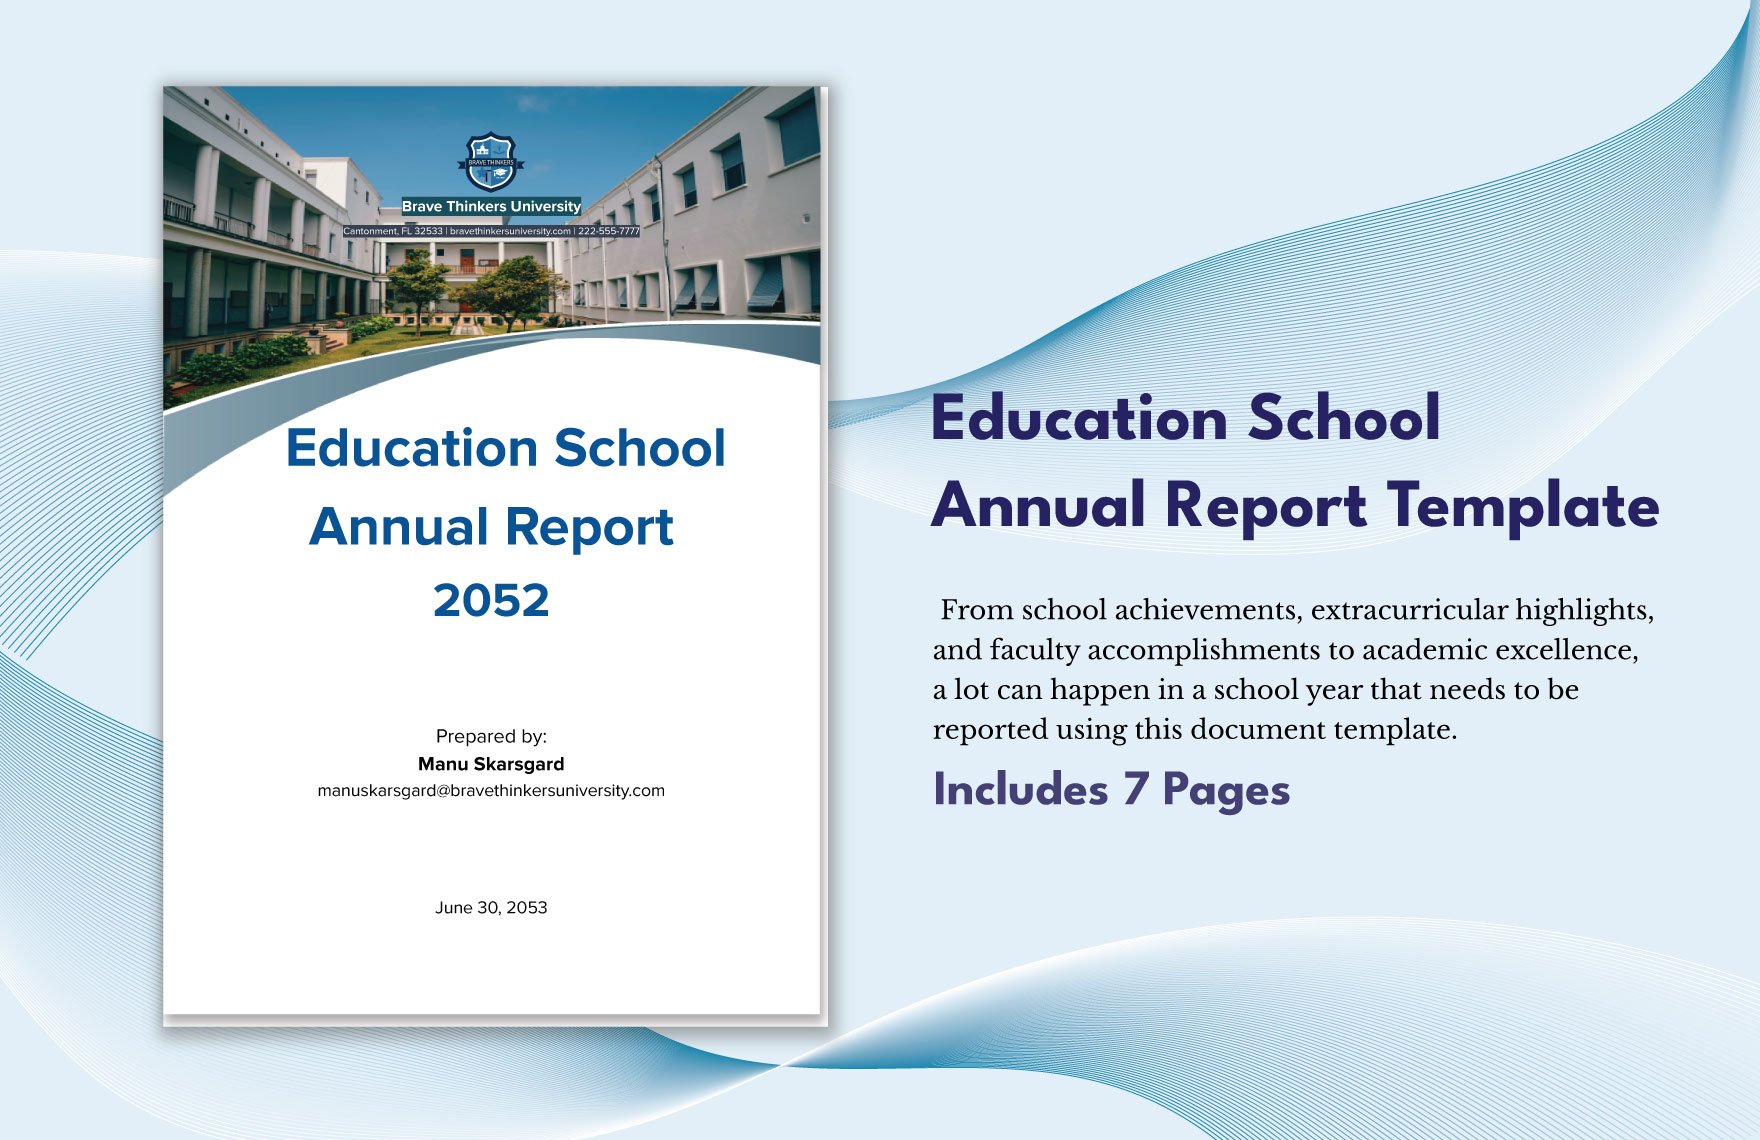 Education School Annual Report Template in Word, Google Docs, PDF